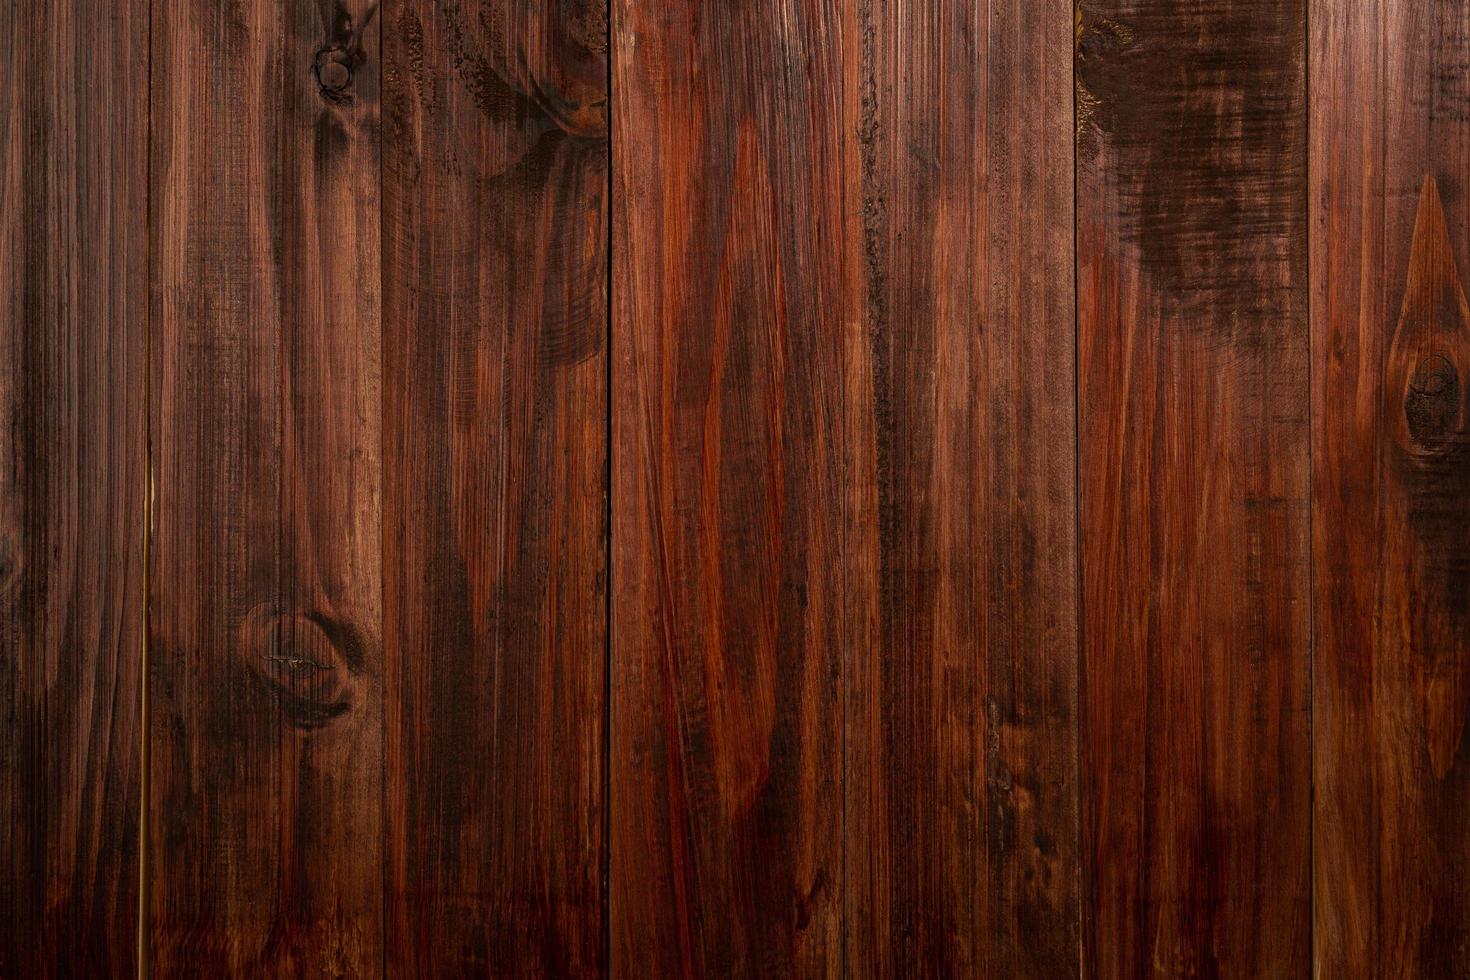 Rustic red wood background photo